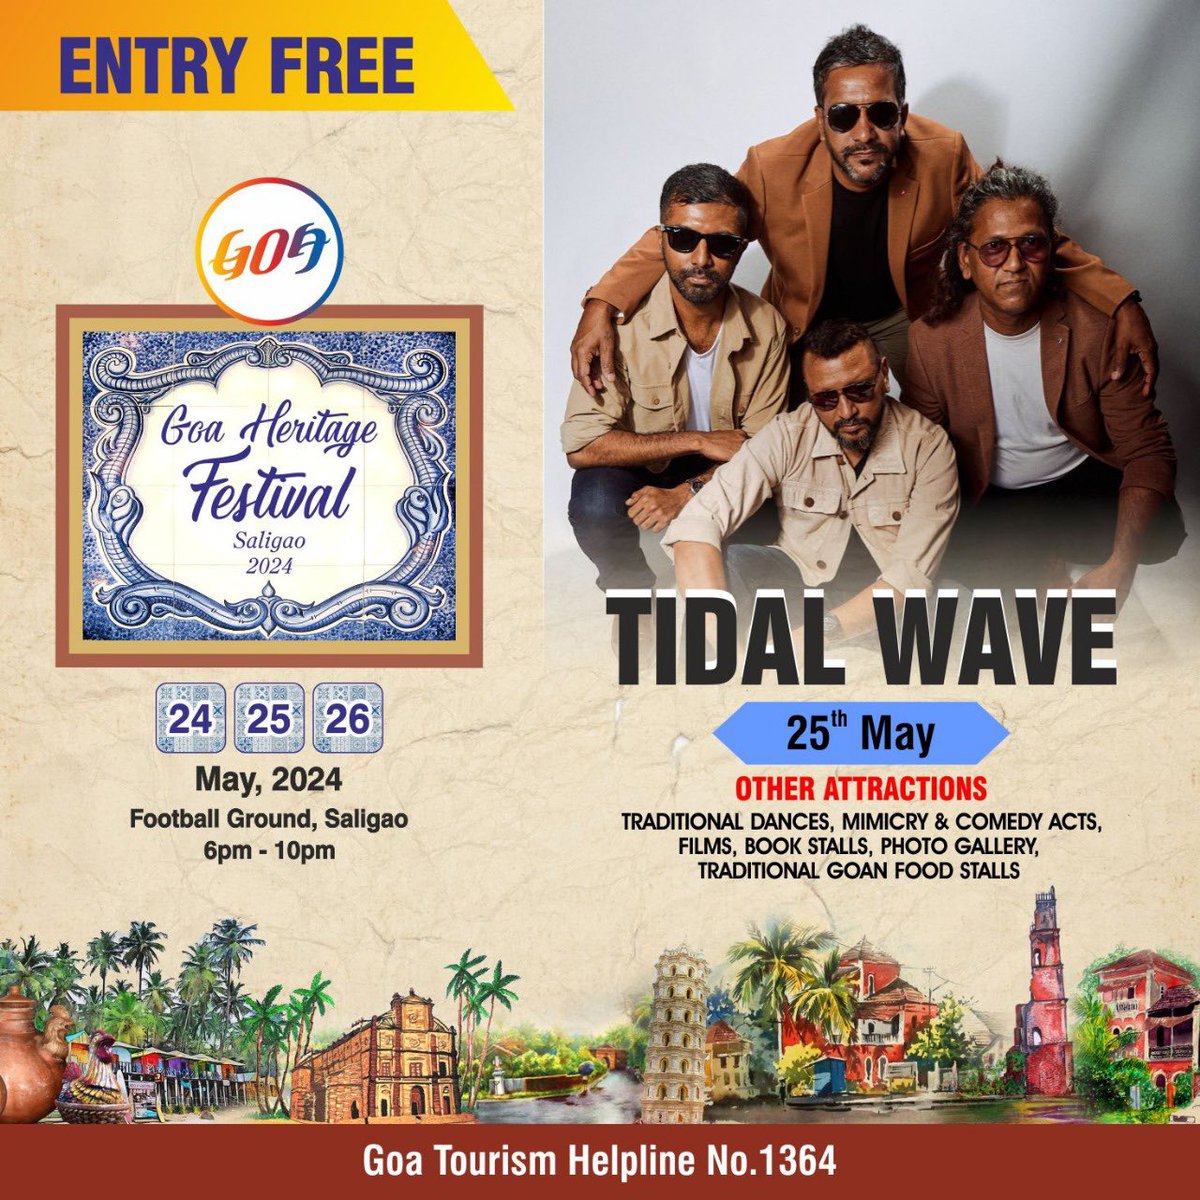 Join us for an unforgettable evening as Tidal wave Goa takes the stage at the #GoaHeritageFestival 2024 today! Enjoy their electrifying performance amidst the vibrant celebrations of Goan culture. #GoaTourism #RegenerativeTourismGoa #GoaBeyondBeaches #HeritageTourism